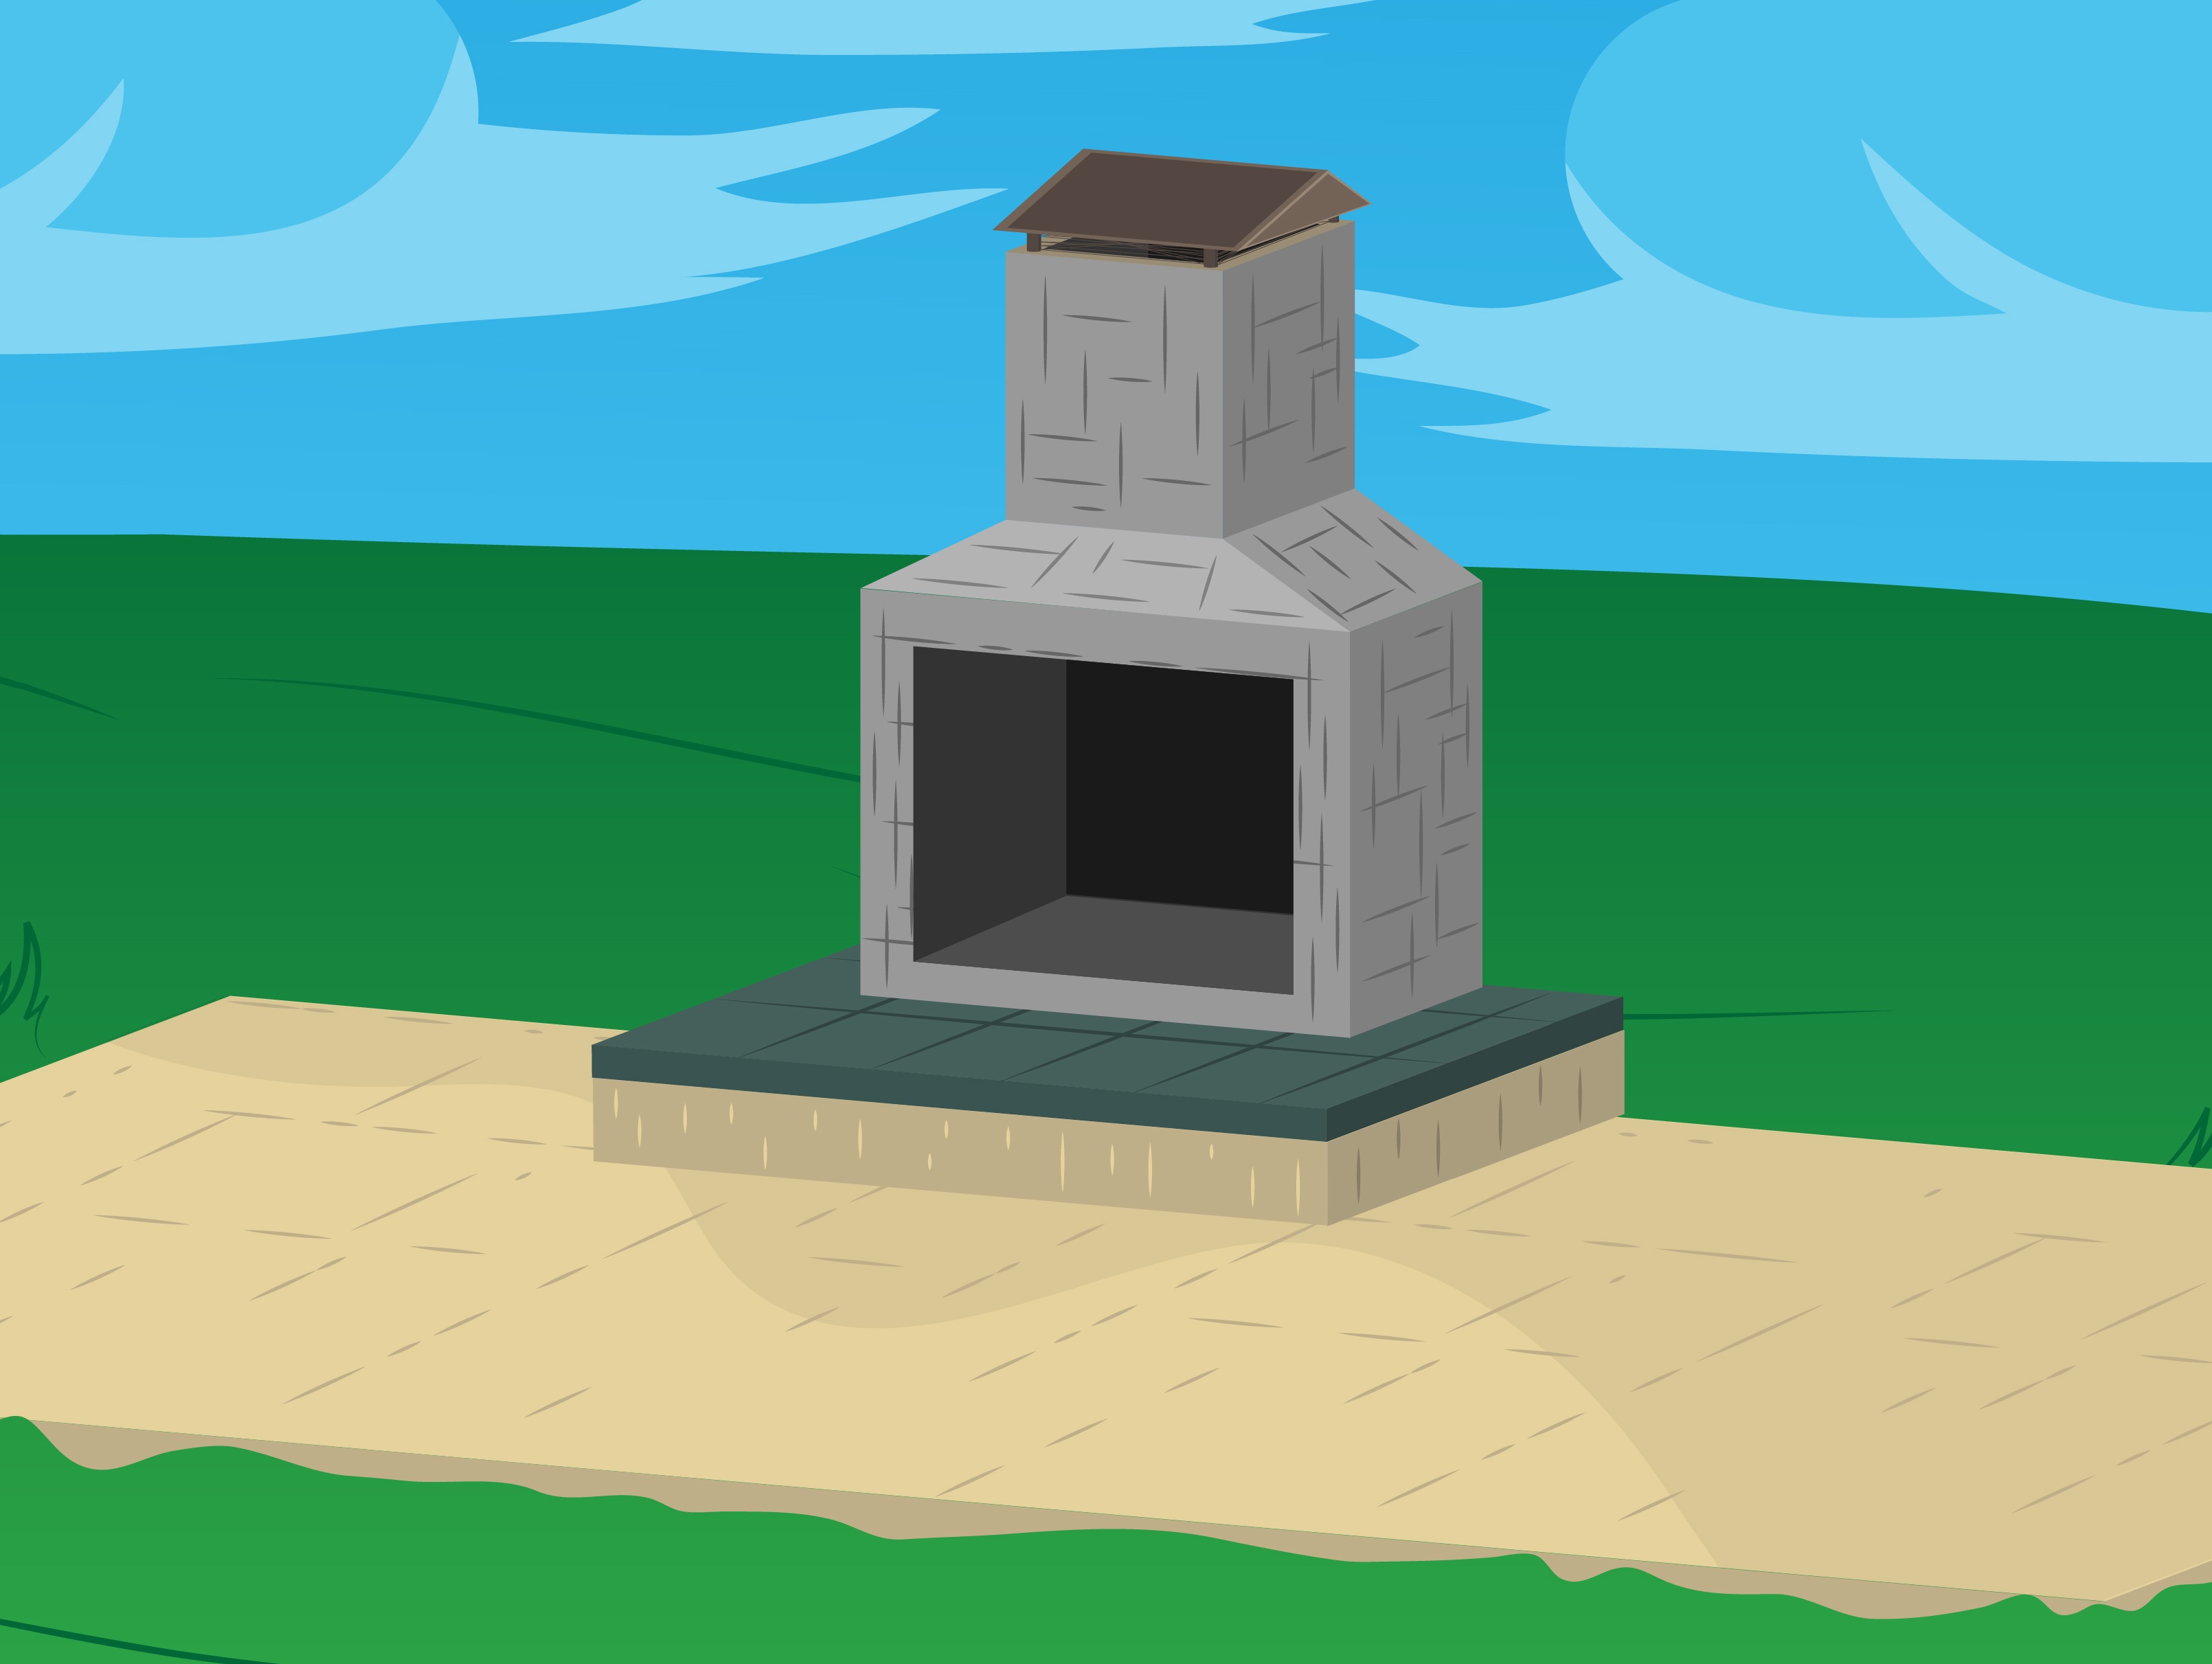 Pizza Oven Fireplace Combo Unique How to Build Outdoor Fireplaces with Wikihow